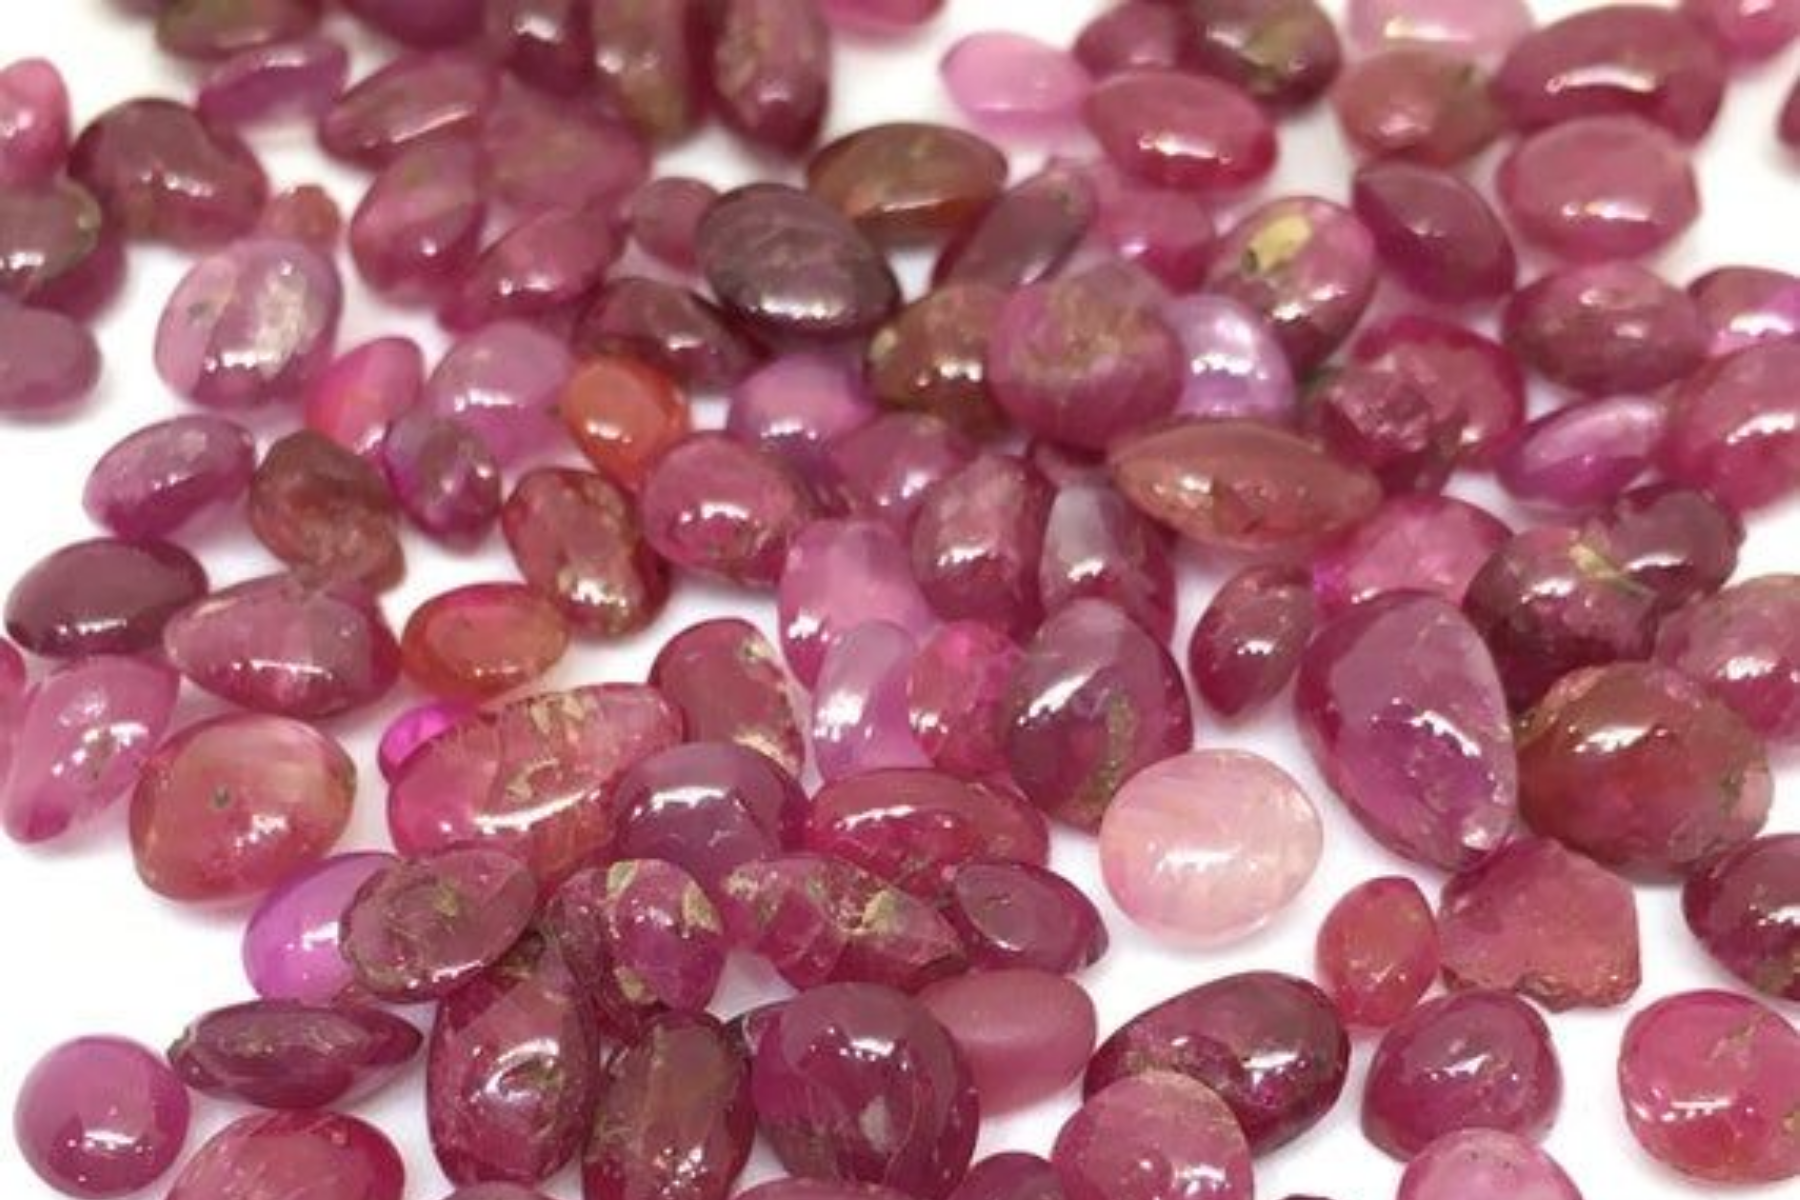 A collection of unpolished Burmese rubies